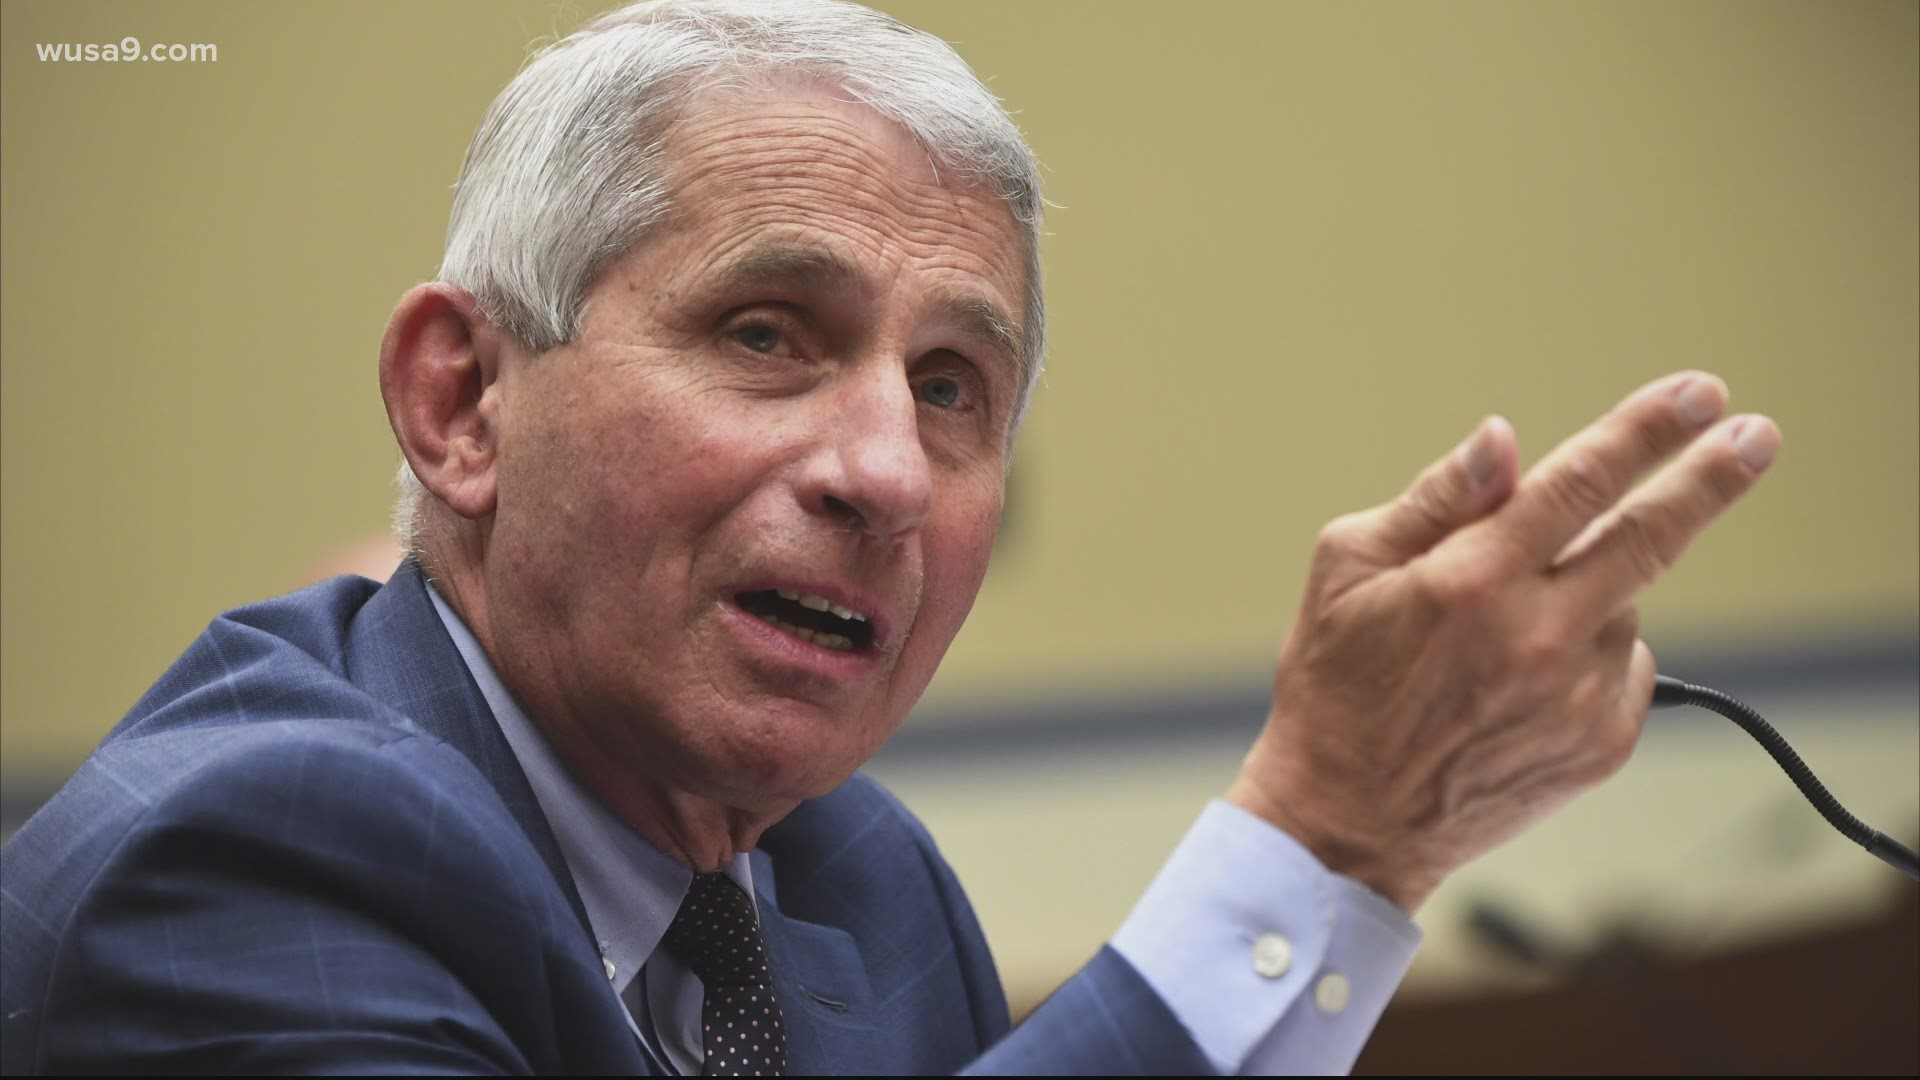 Dr. Fauci turns 80 on Dec. 24.